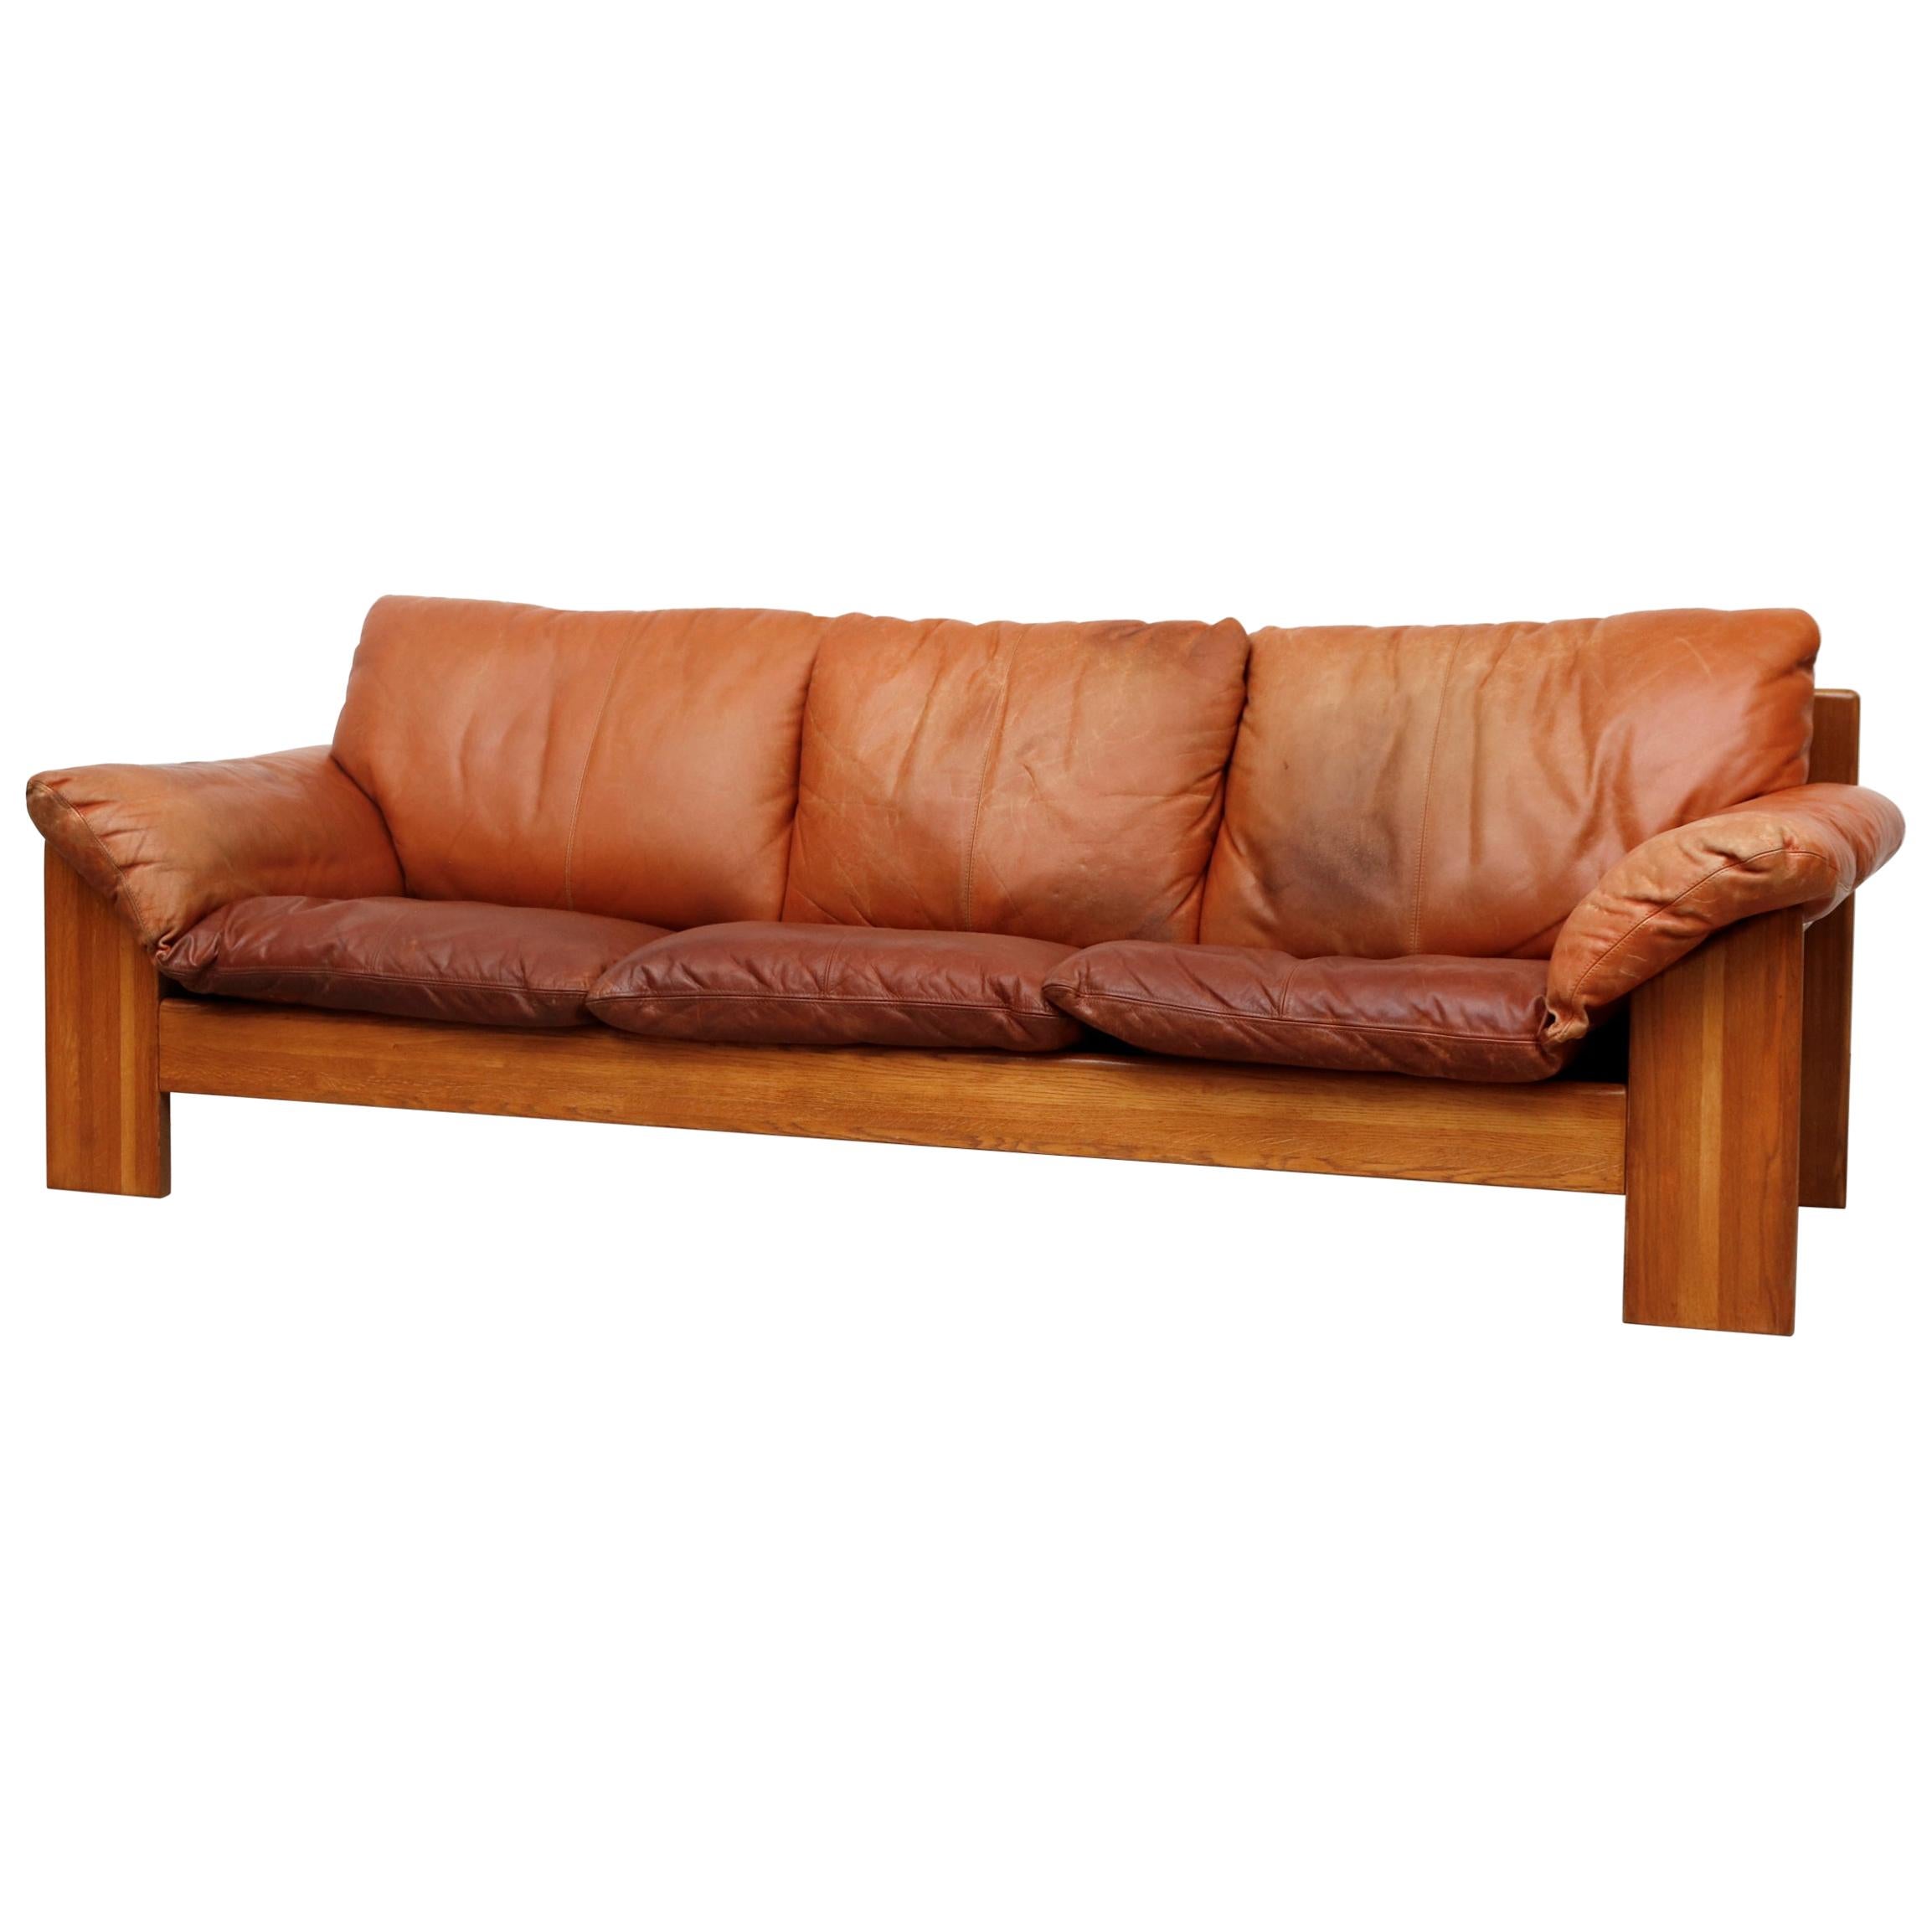 Handsome Leolux 3-Seat Sofa with Cognac Leather Cushions